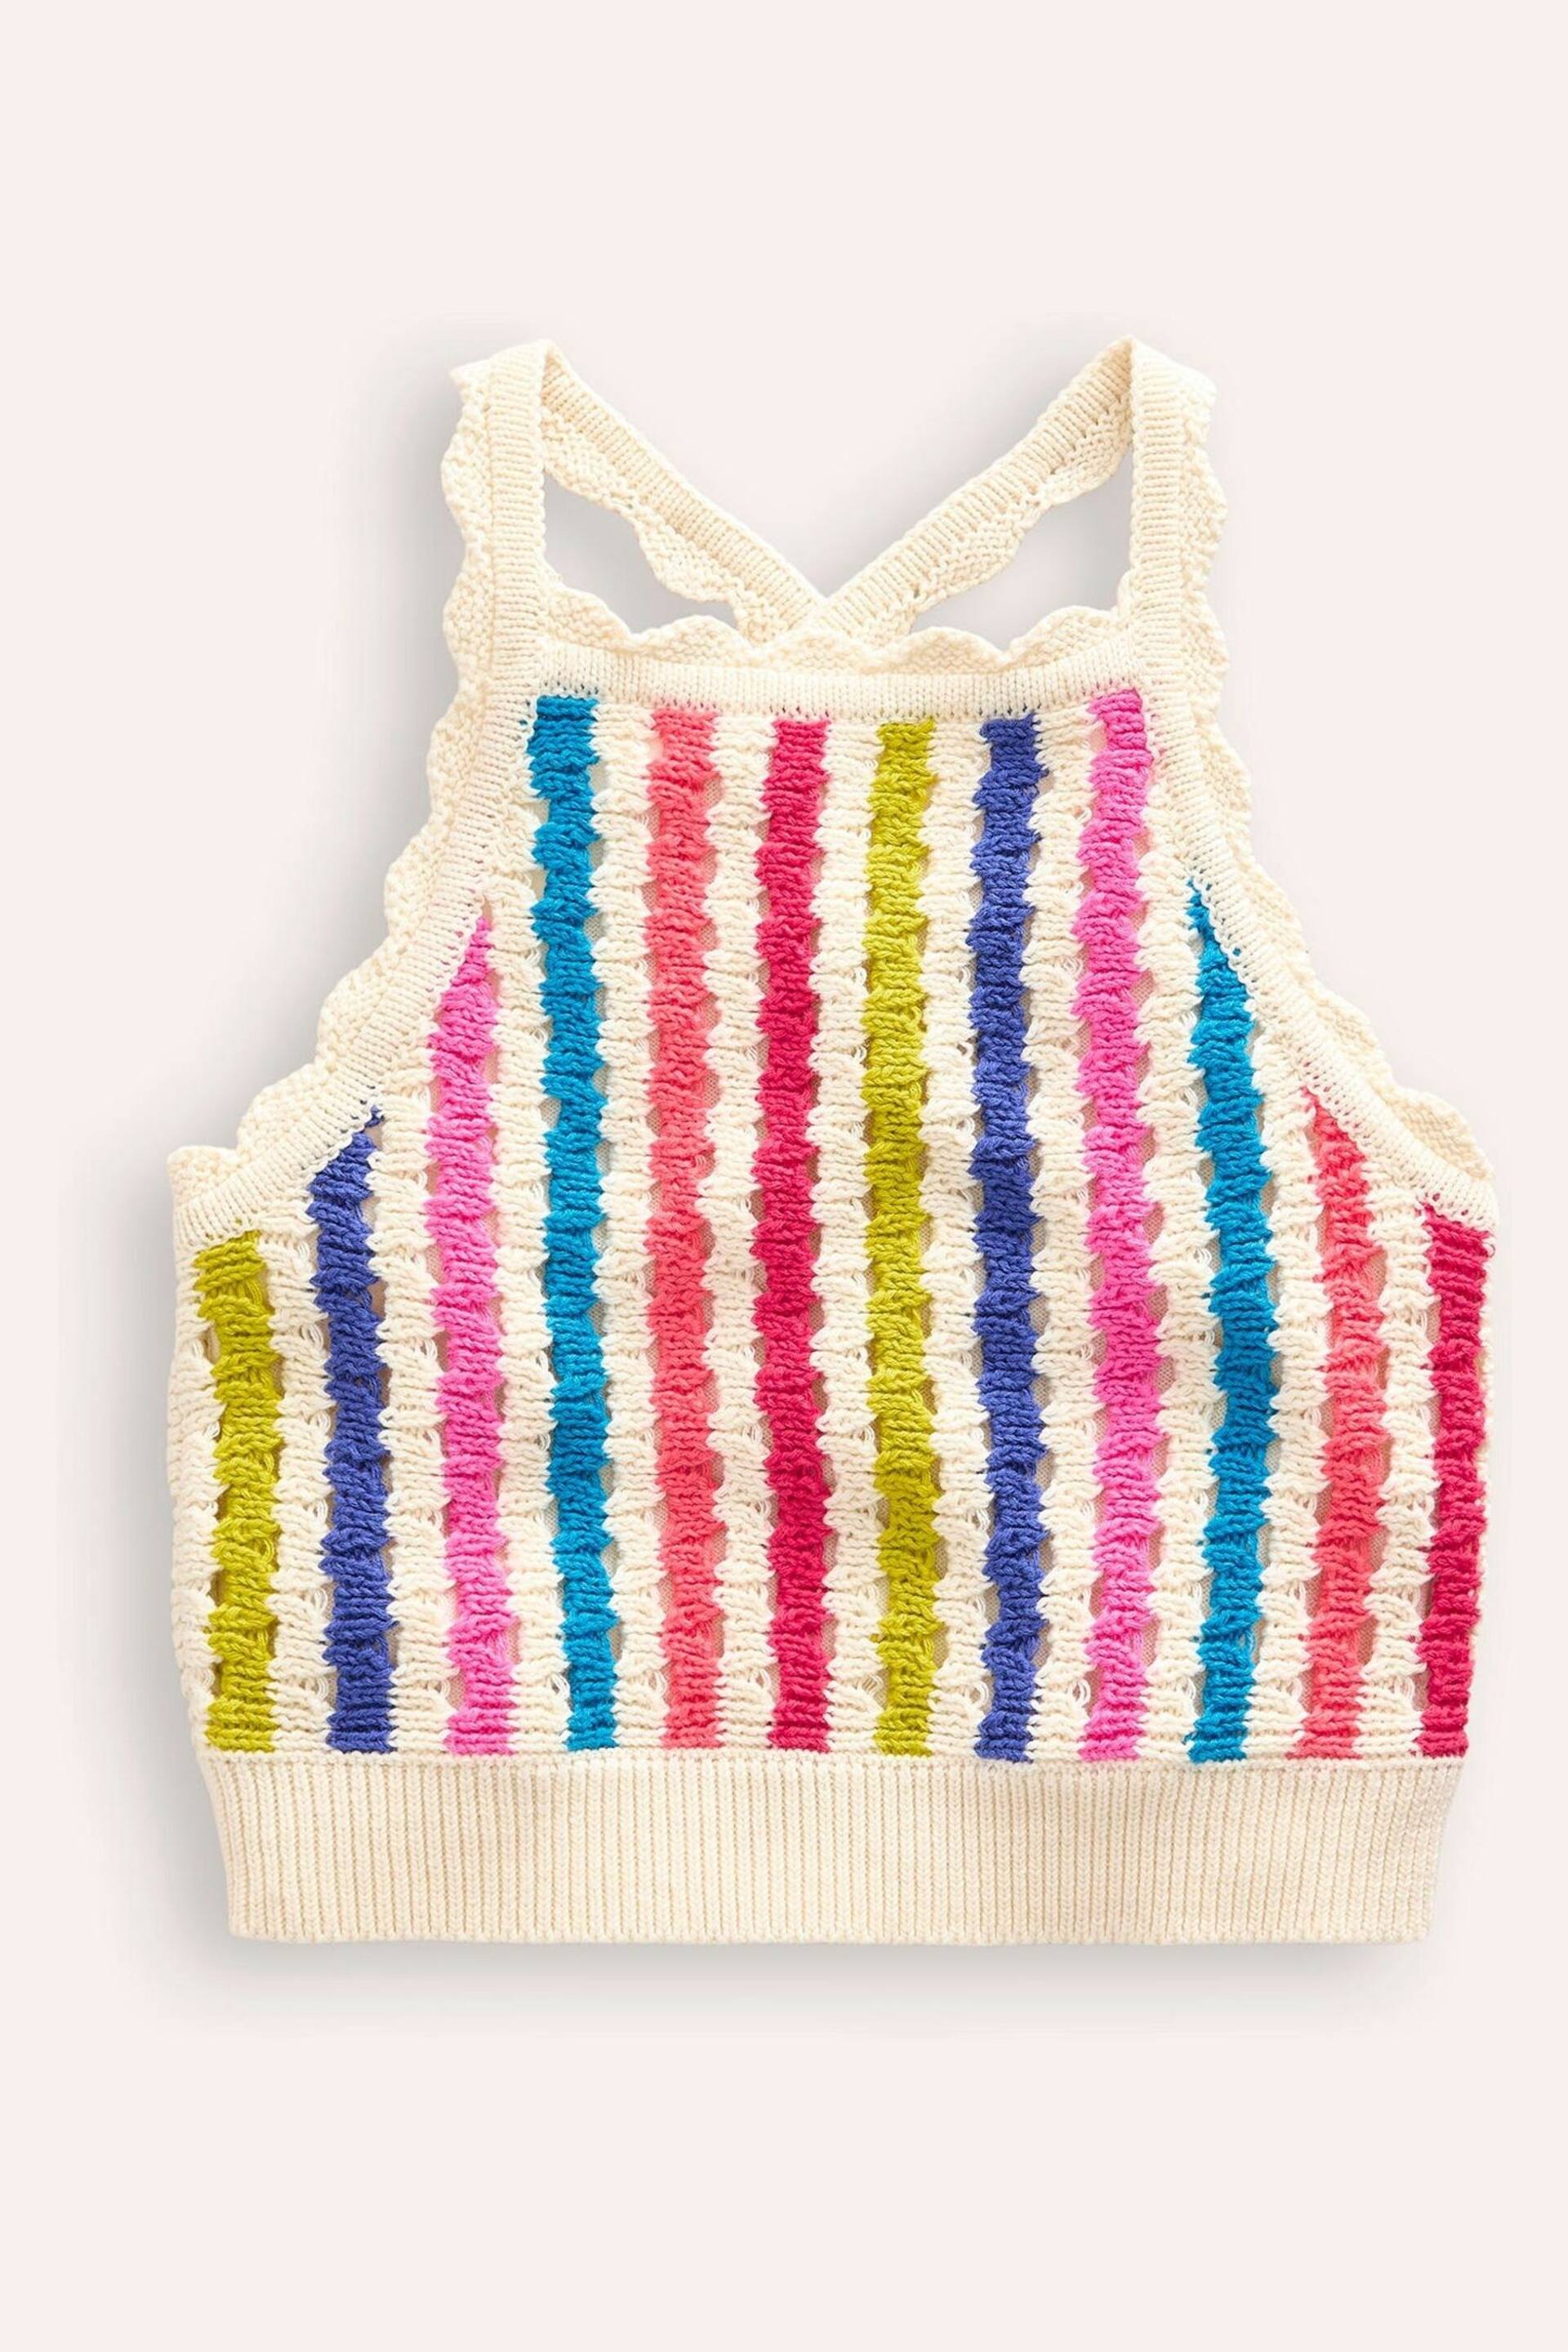 Boden Natural Stripe Knitted Top - Image 2 of 4